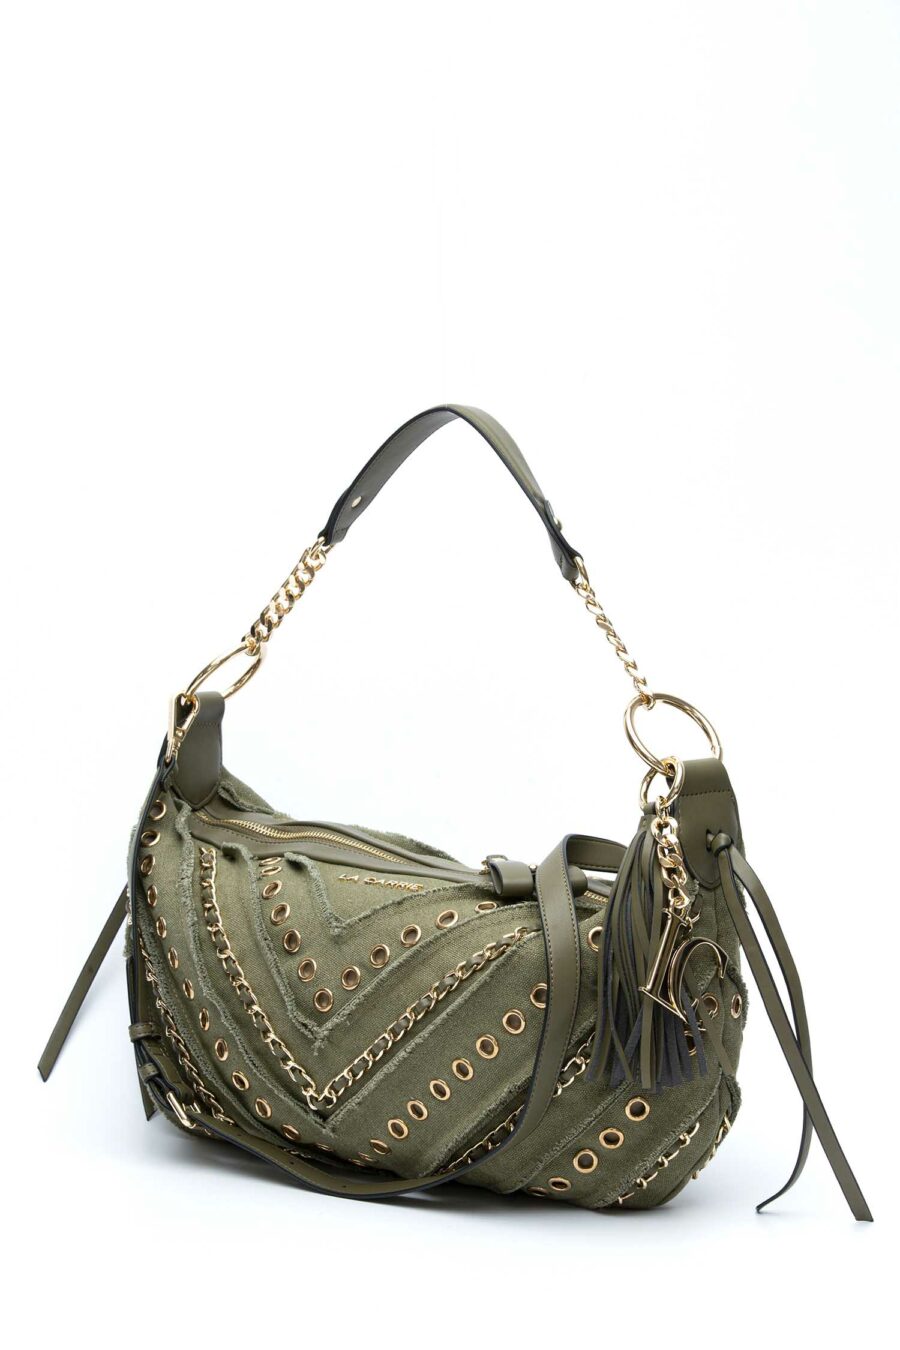 LA CARRIE-BORSA MOON DENIM CANVAS-LCTS350CAN GREEN